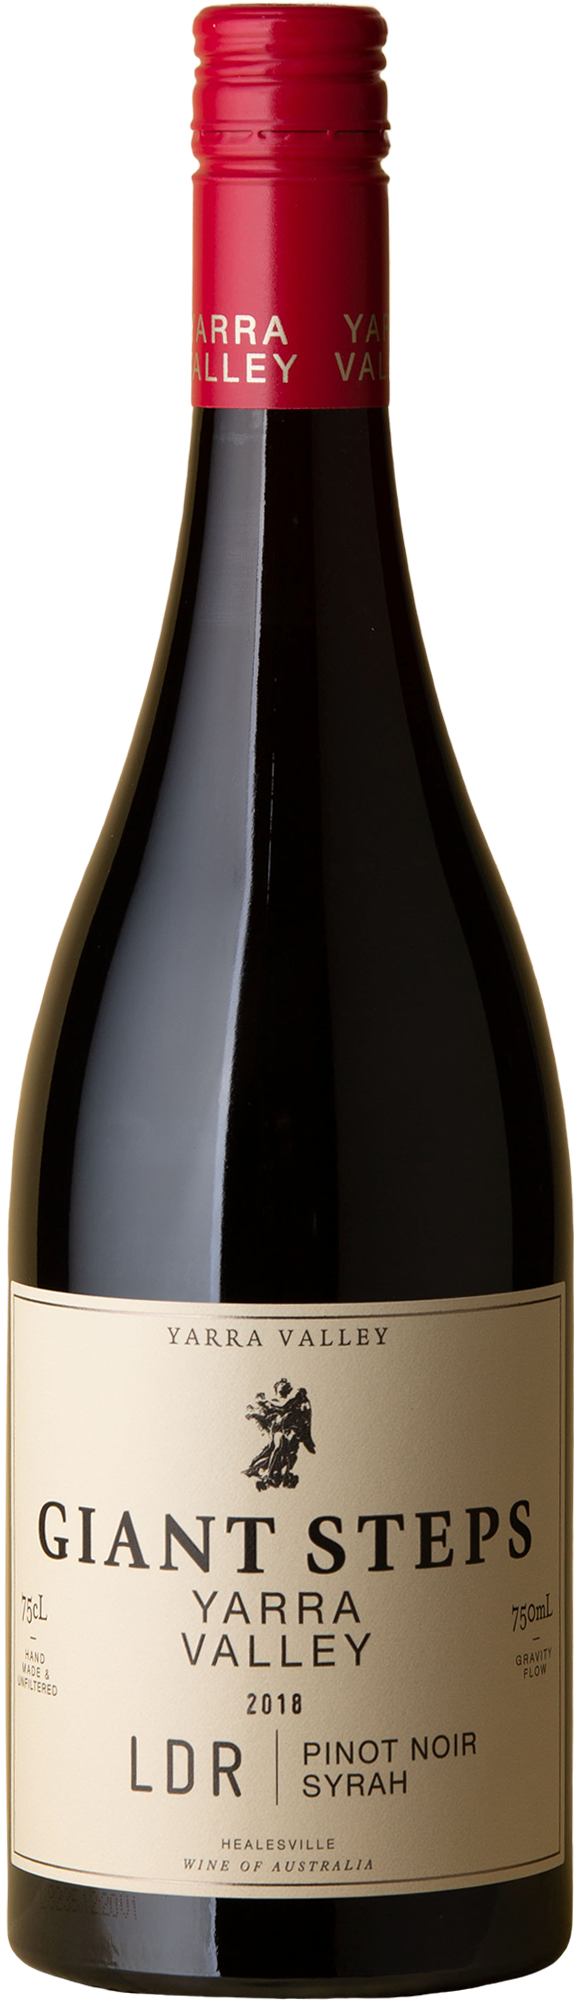 Giant Steps - LDR Pinot Syrah 2018 Red Wine